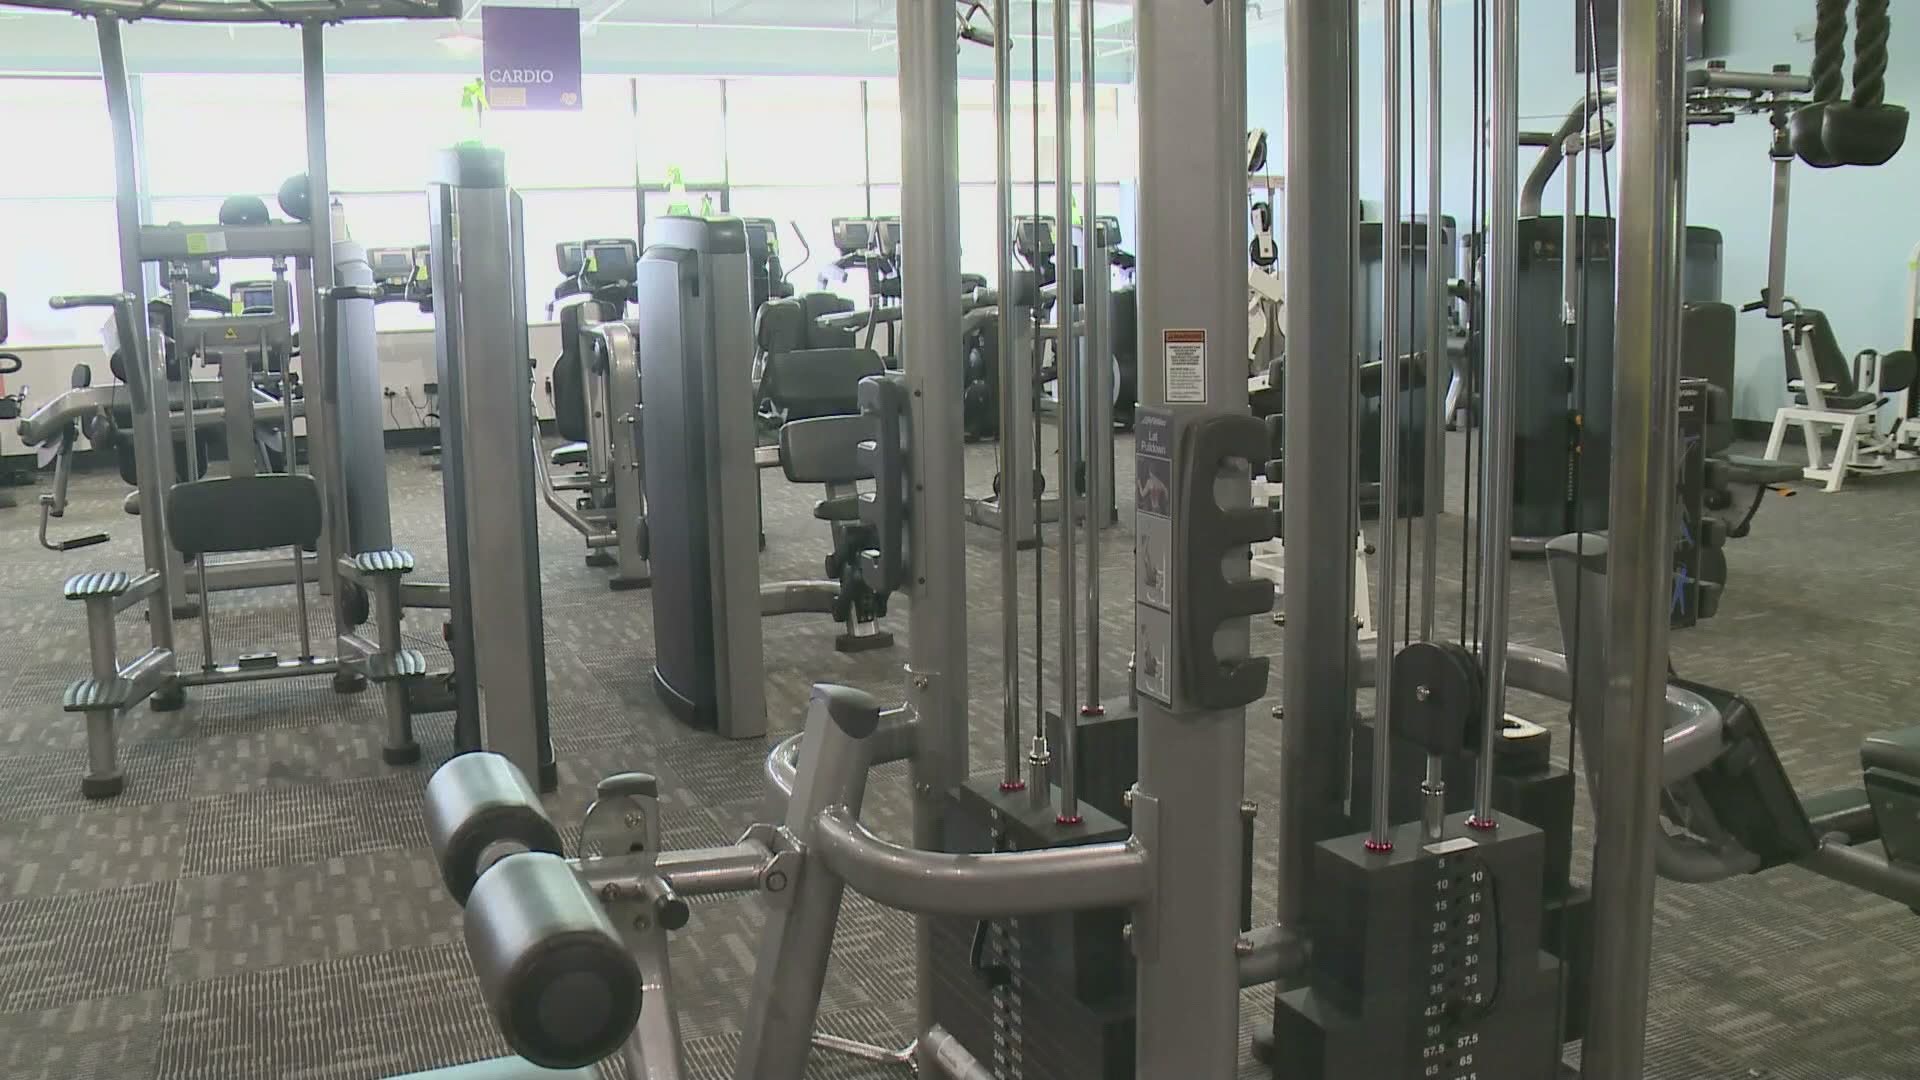 A group of over 50 owners of fitness businesses, including gyms, carefully crafted a detailed letter that ended up on the governor's desk Friday.